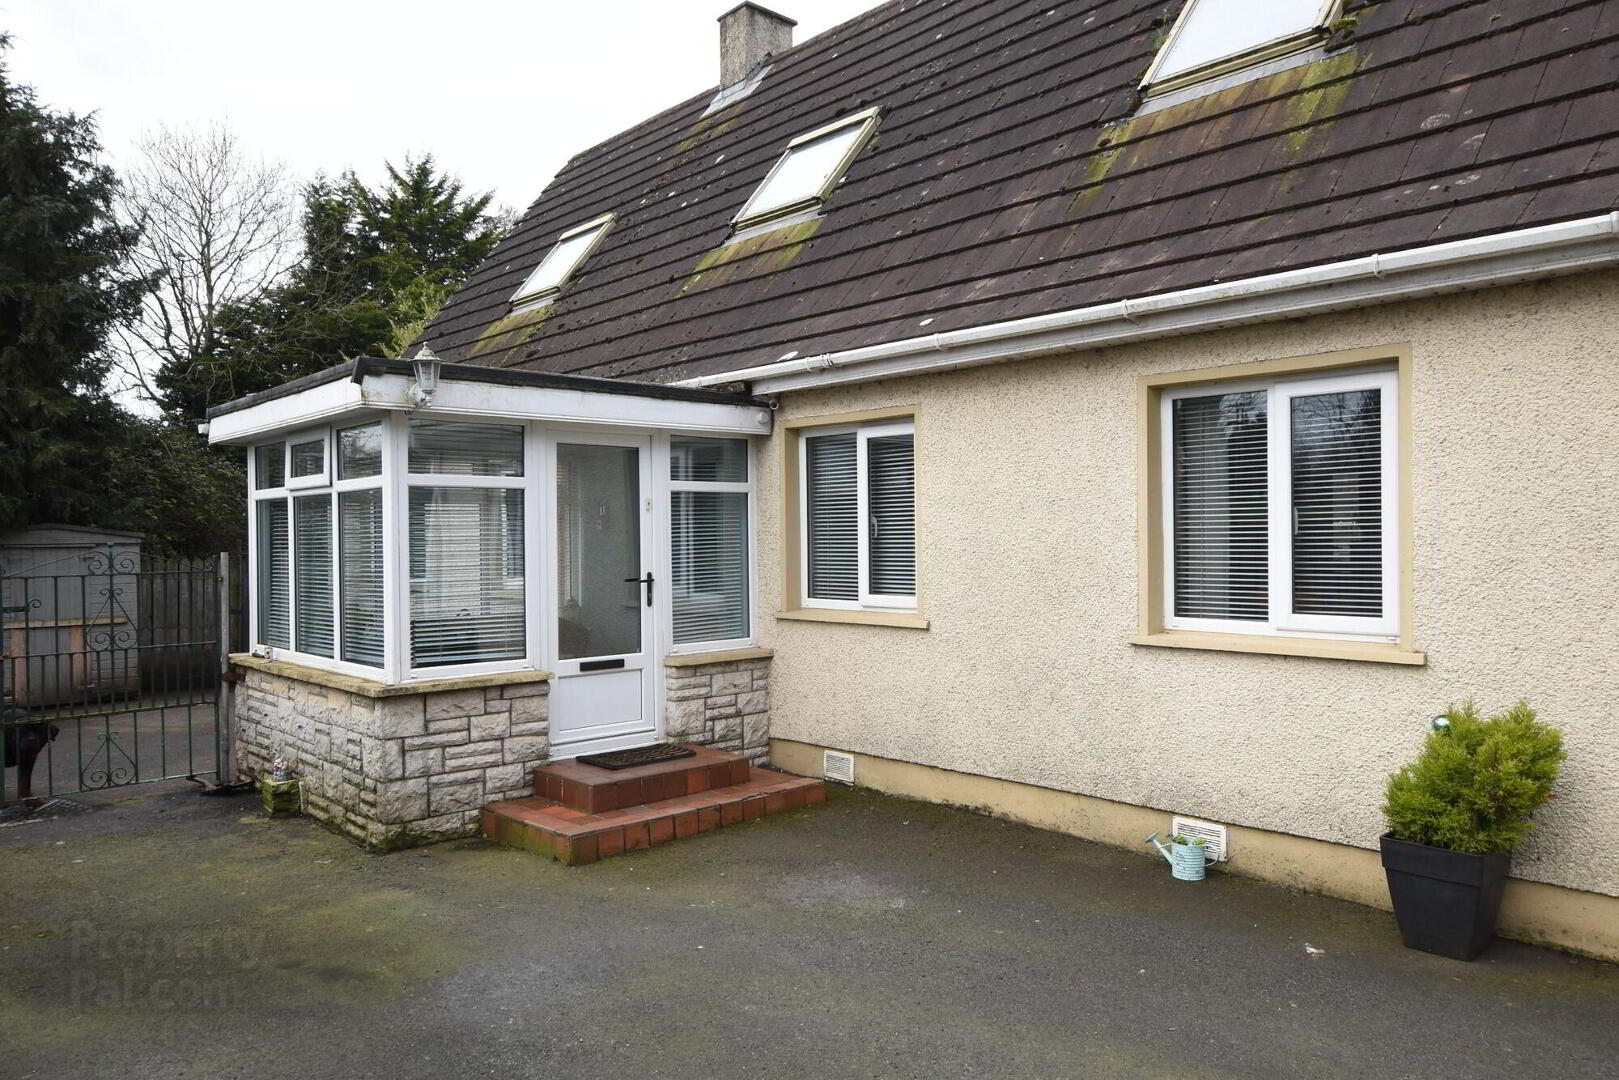 A House With FPP For Large Extension/ Annex, 75 Lurgan Road